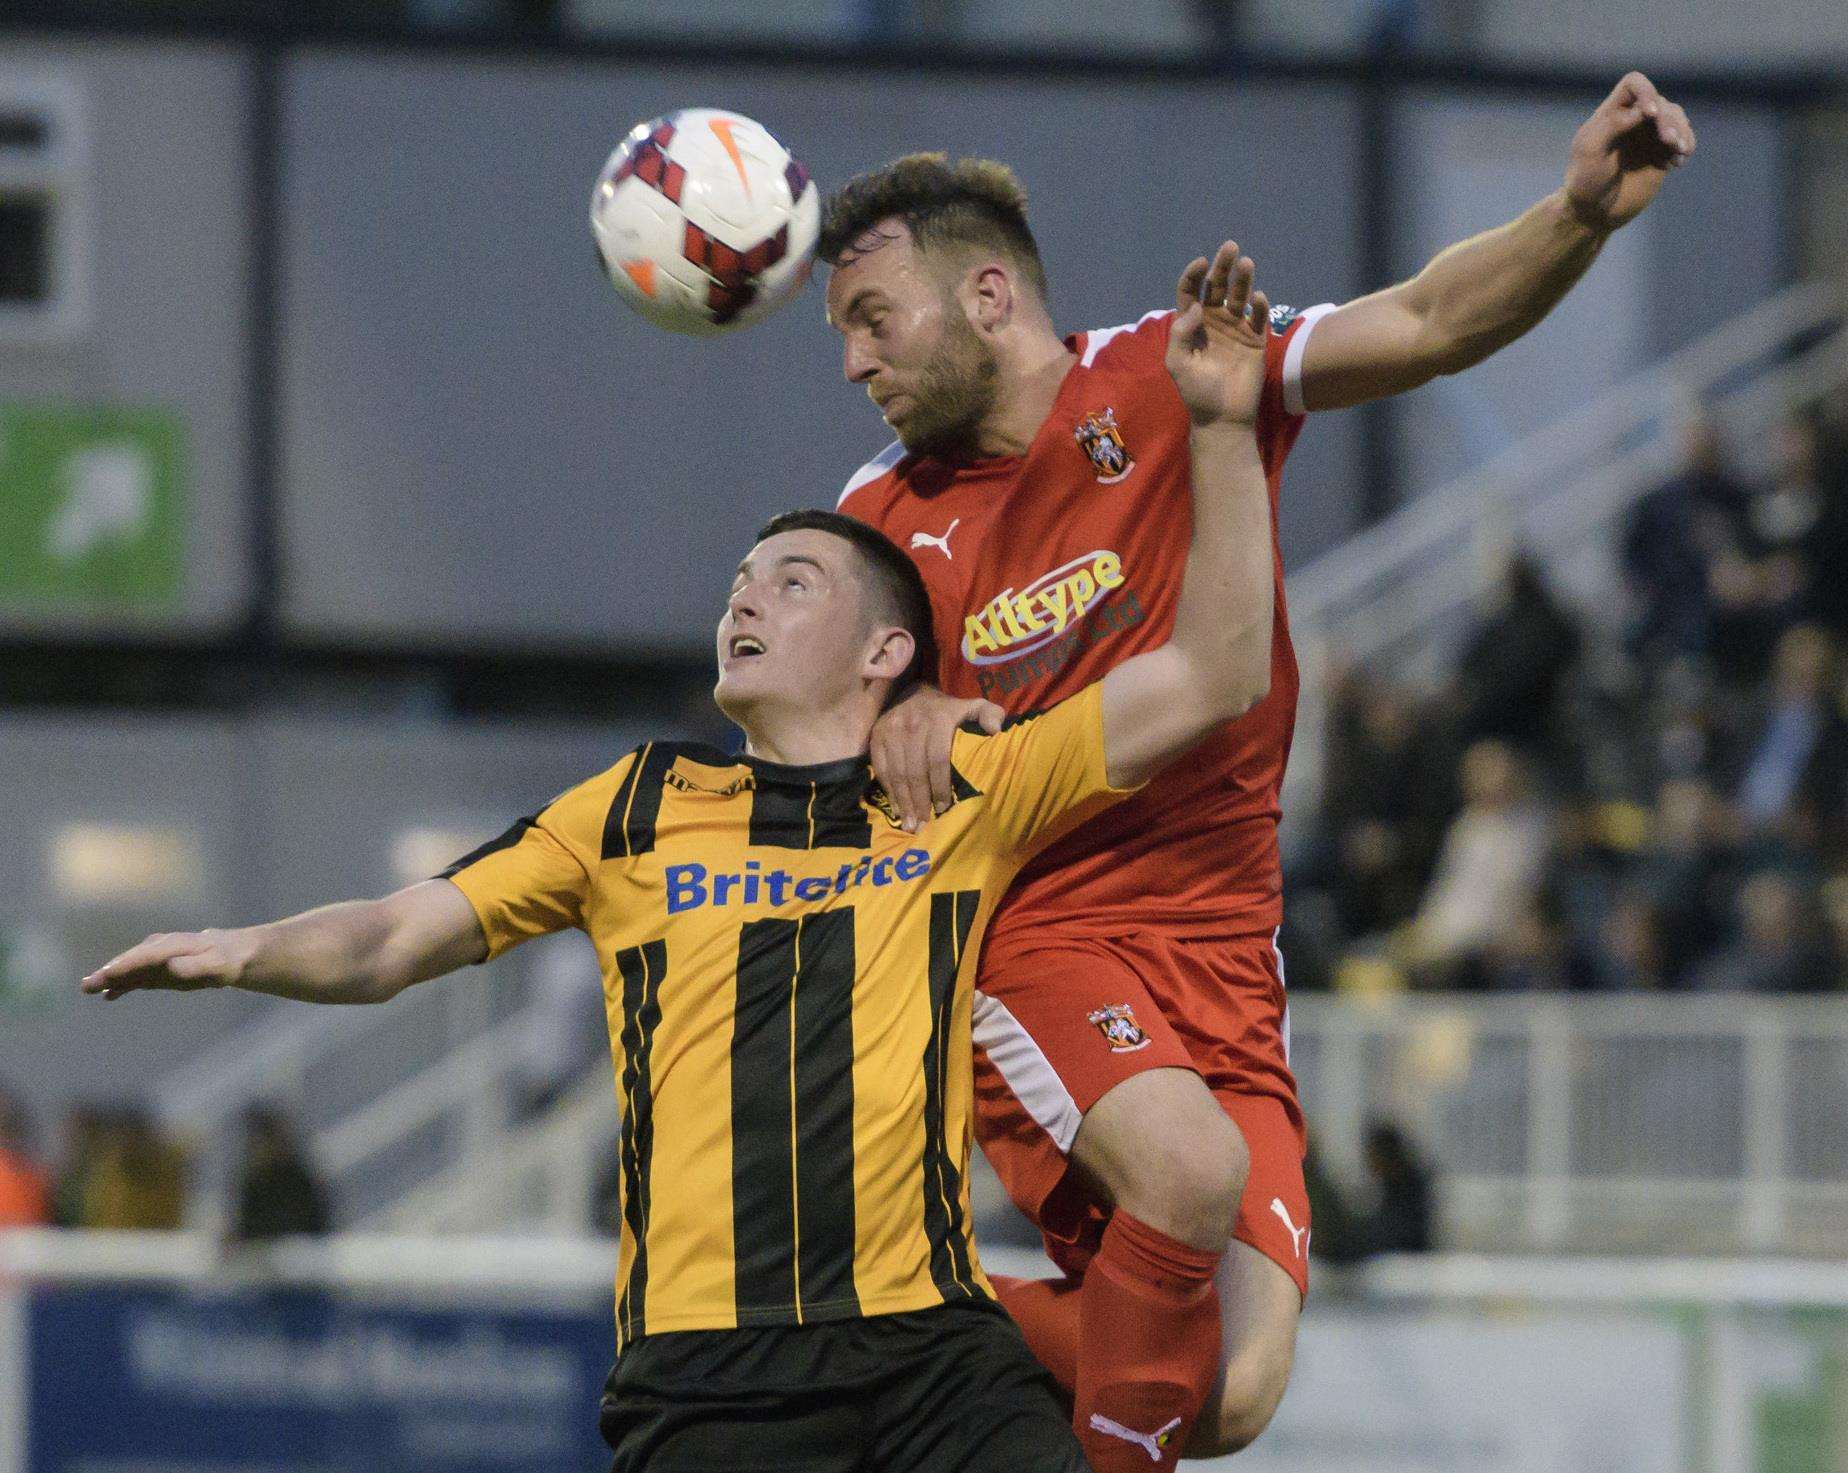 Tom Wraight in Kent Senior Cup final action for Maidstone Picture: Andy Payton